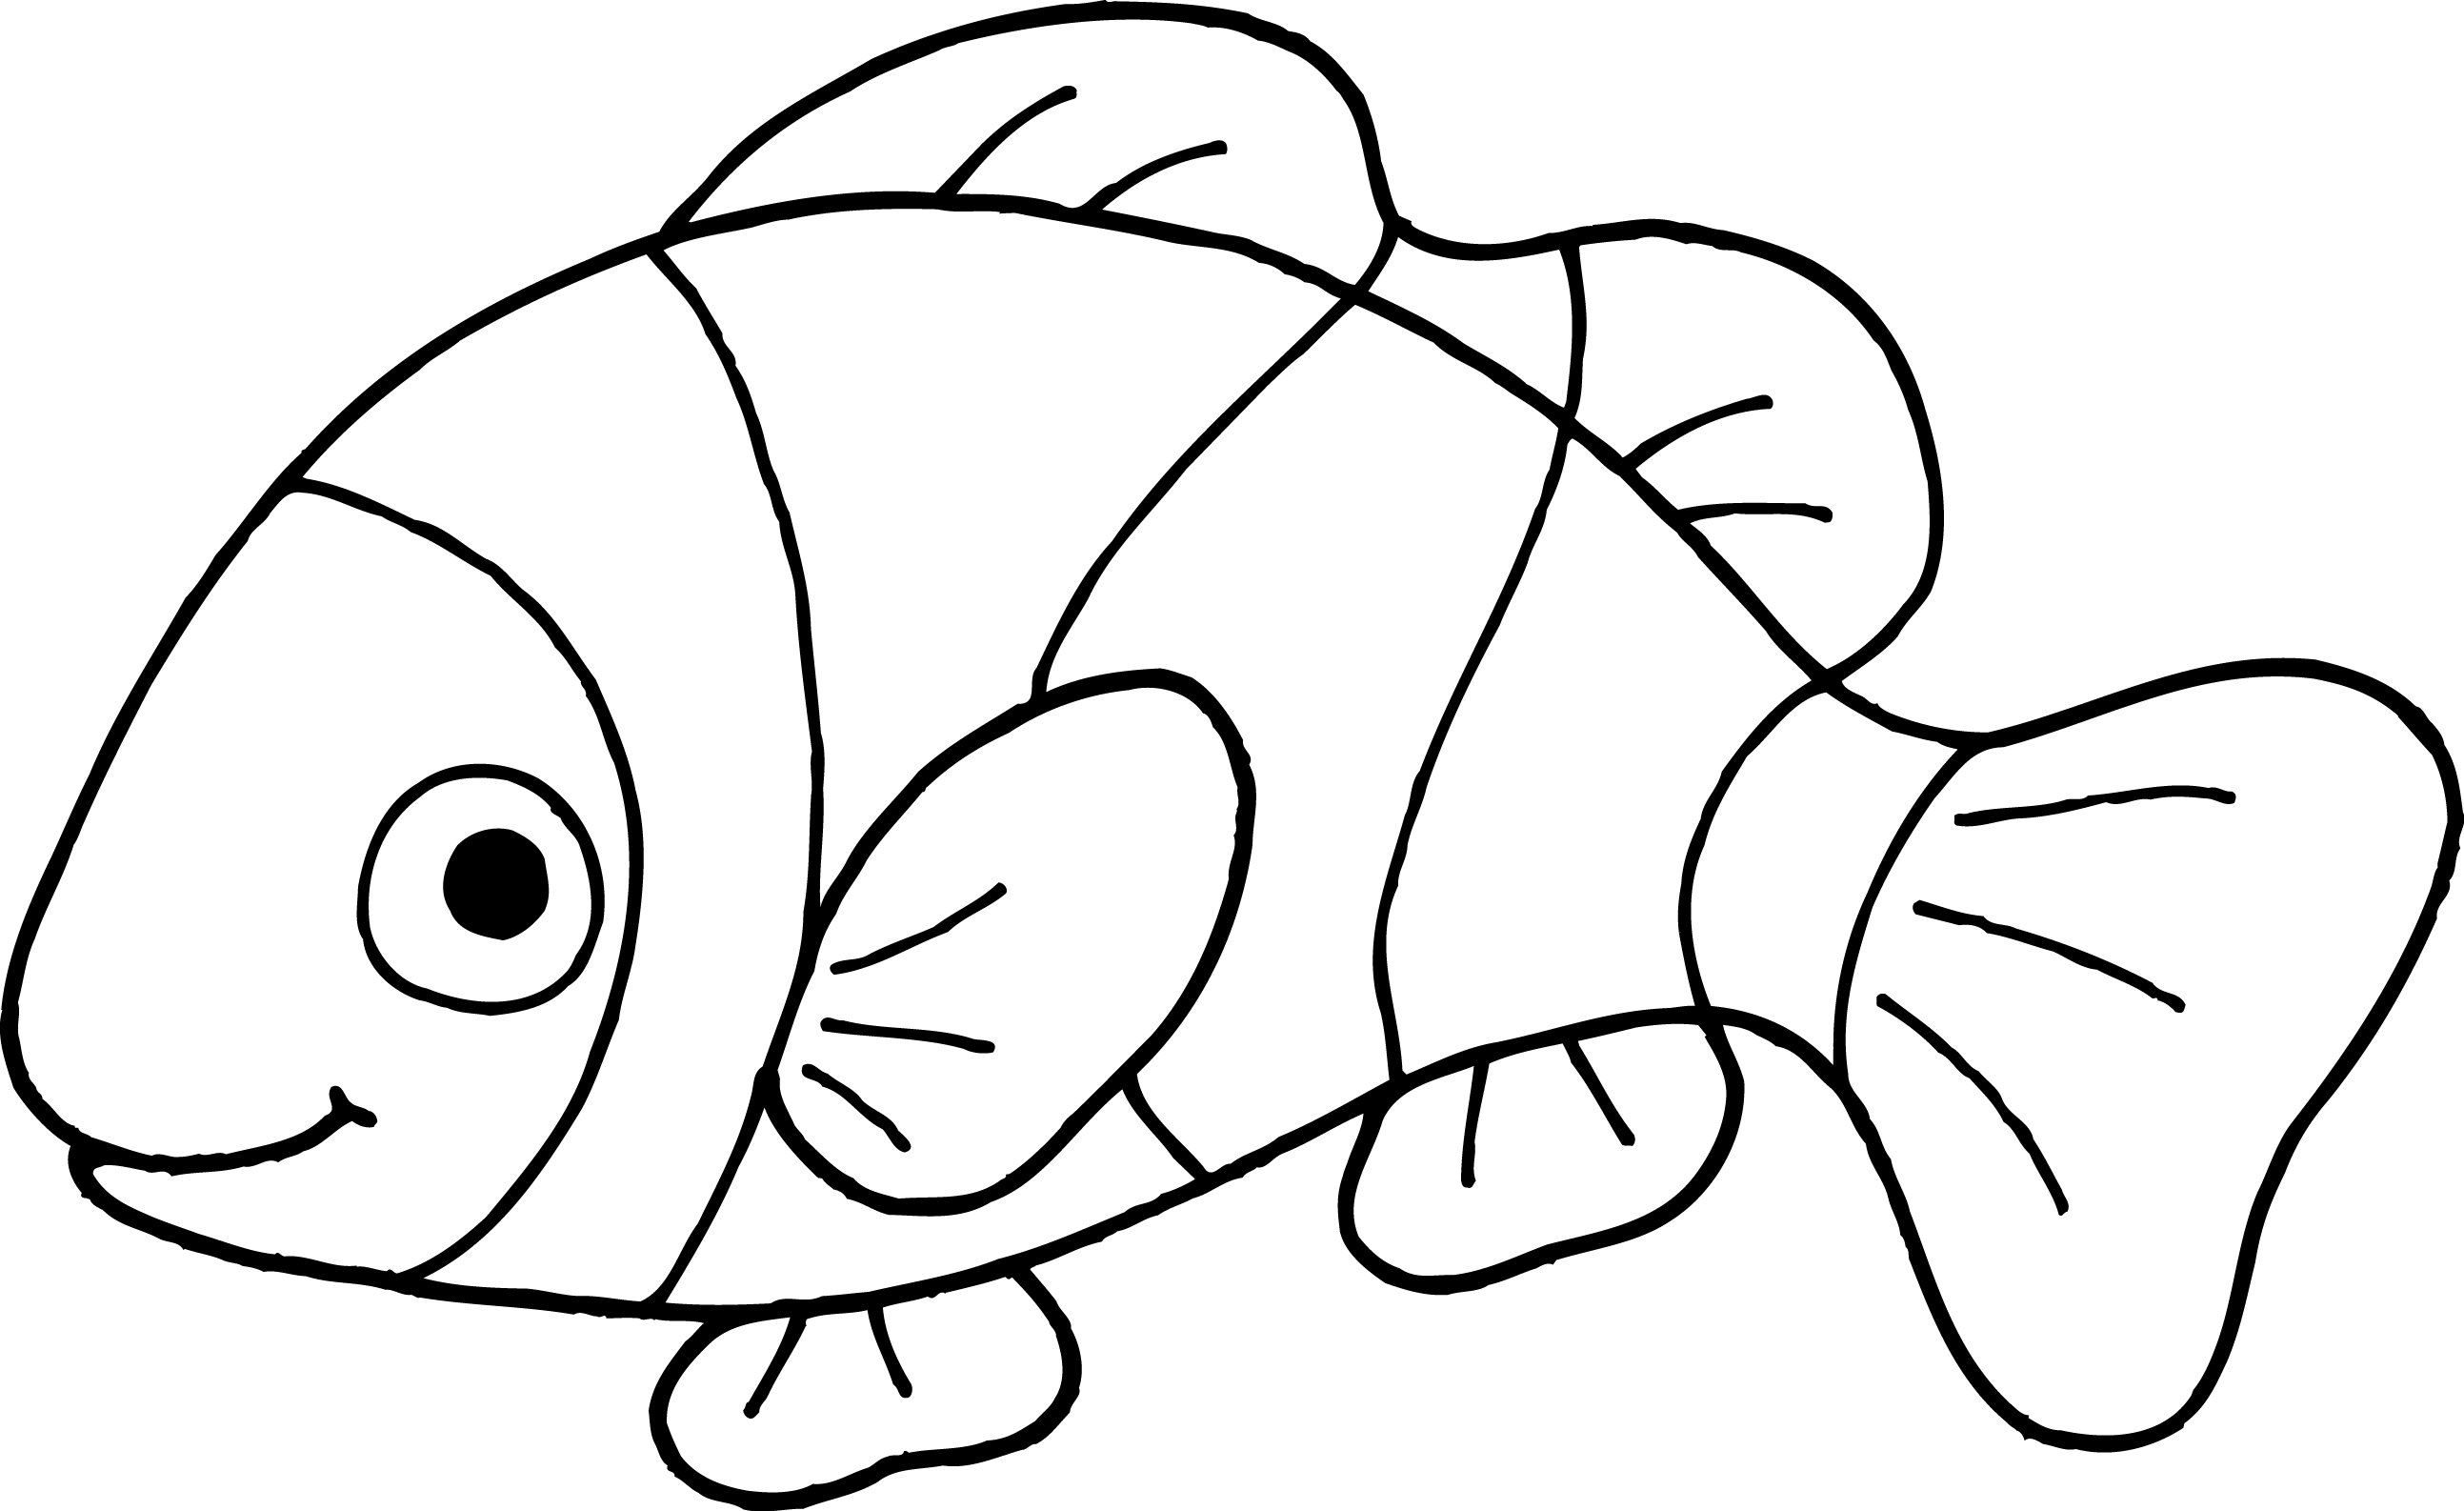 Goldfish Clipart Black And White | Clipart Panda - Free Clipart Images